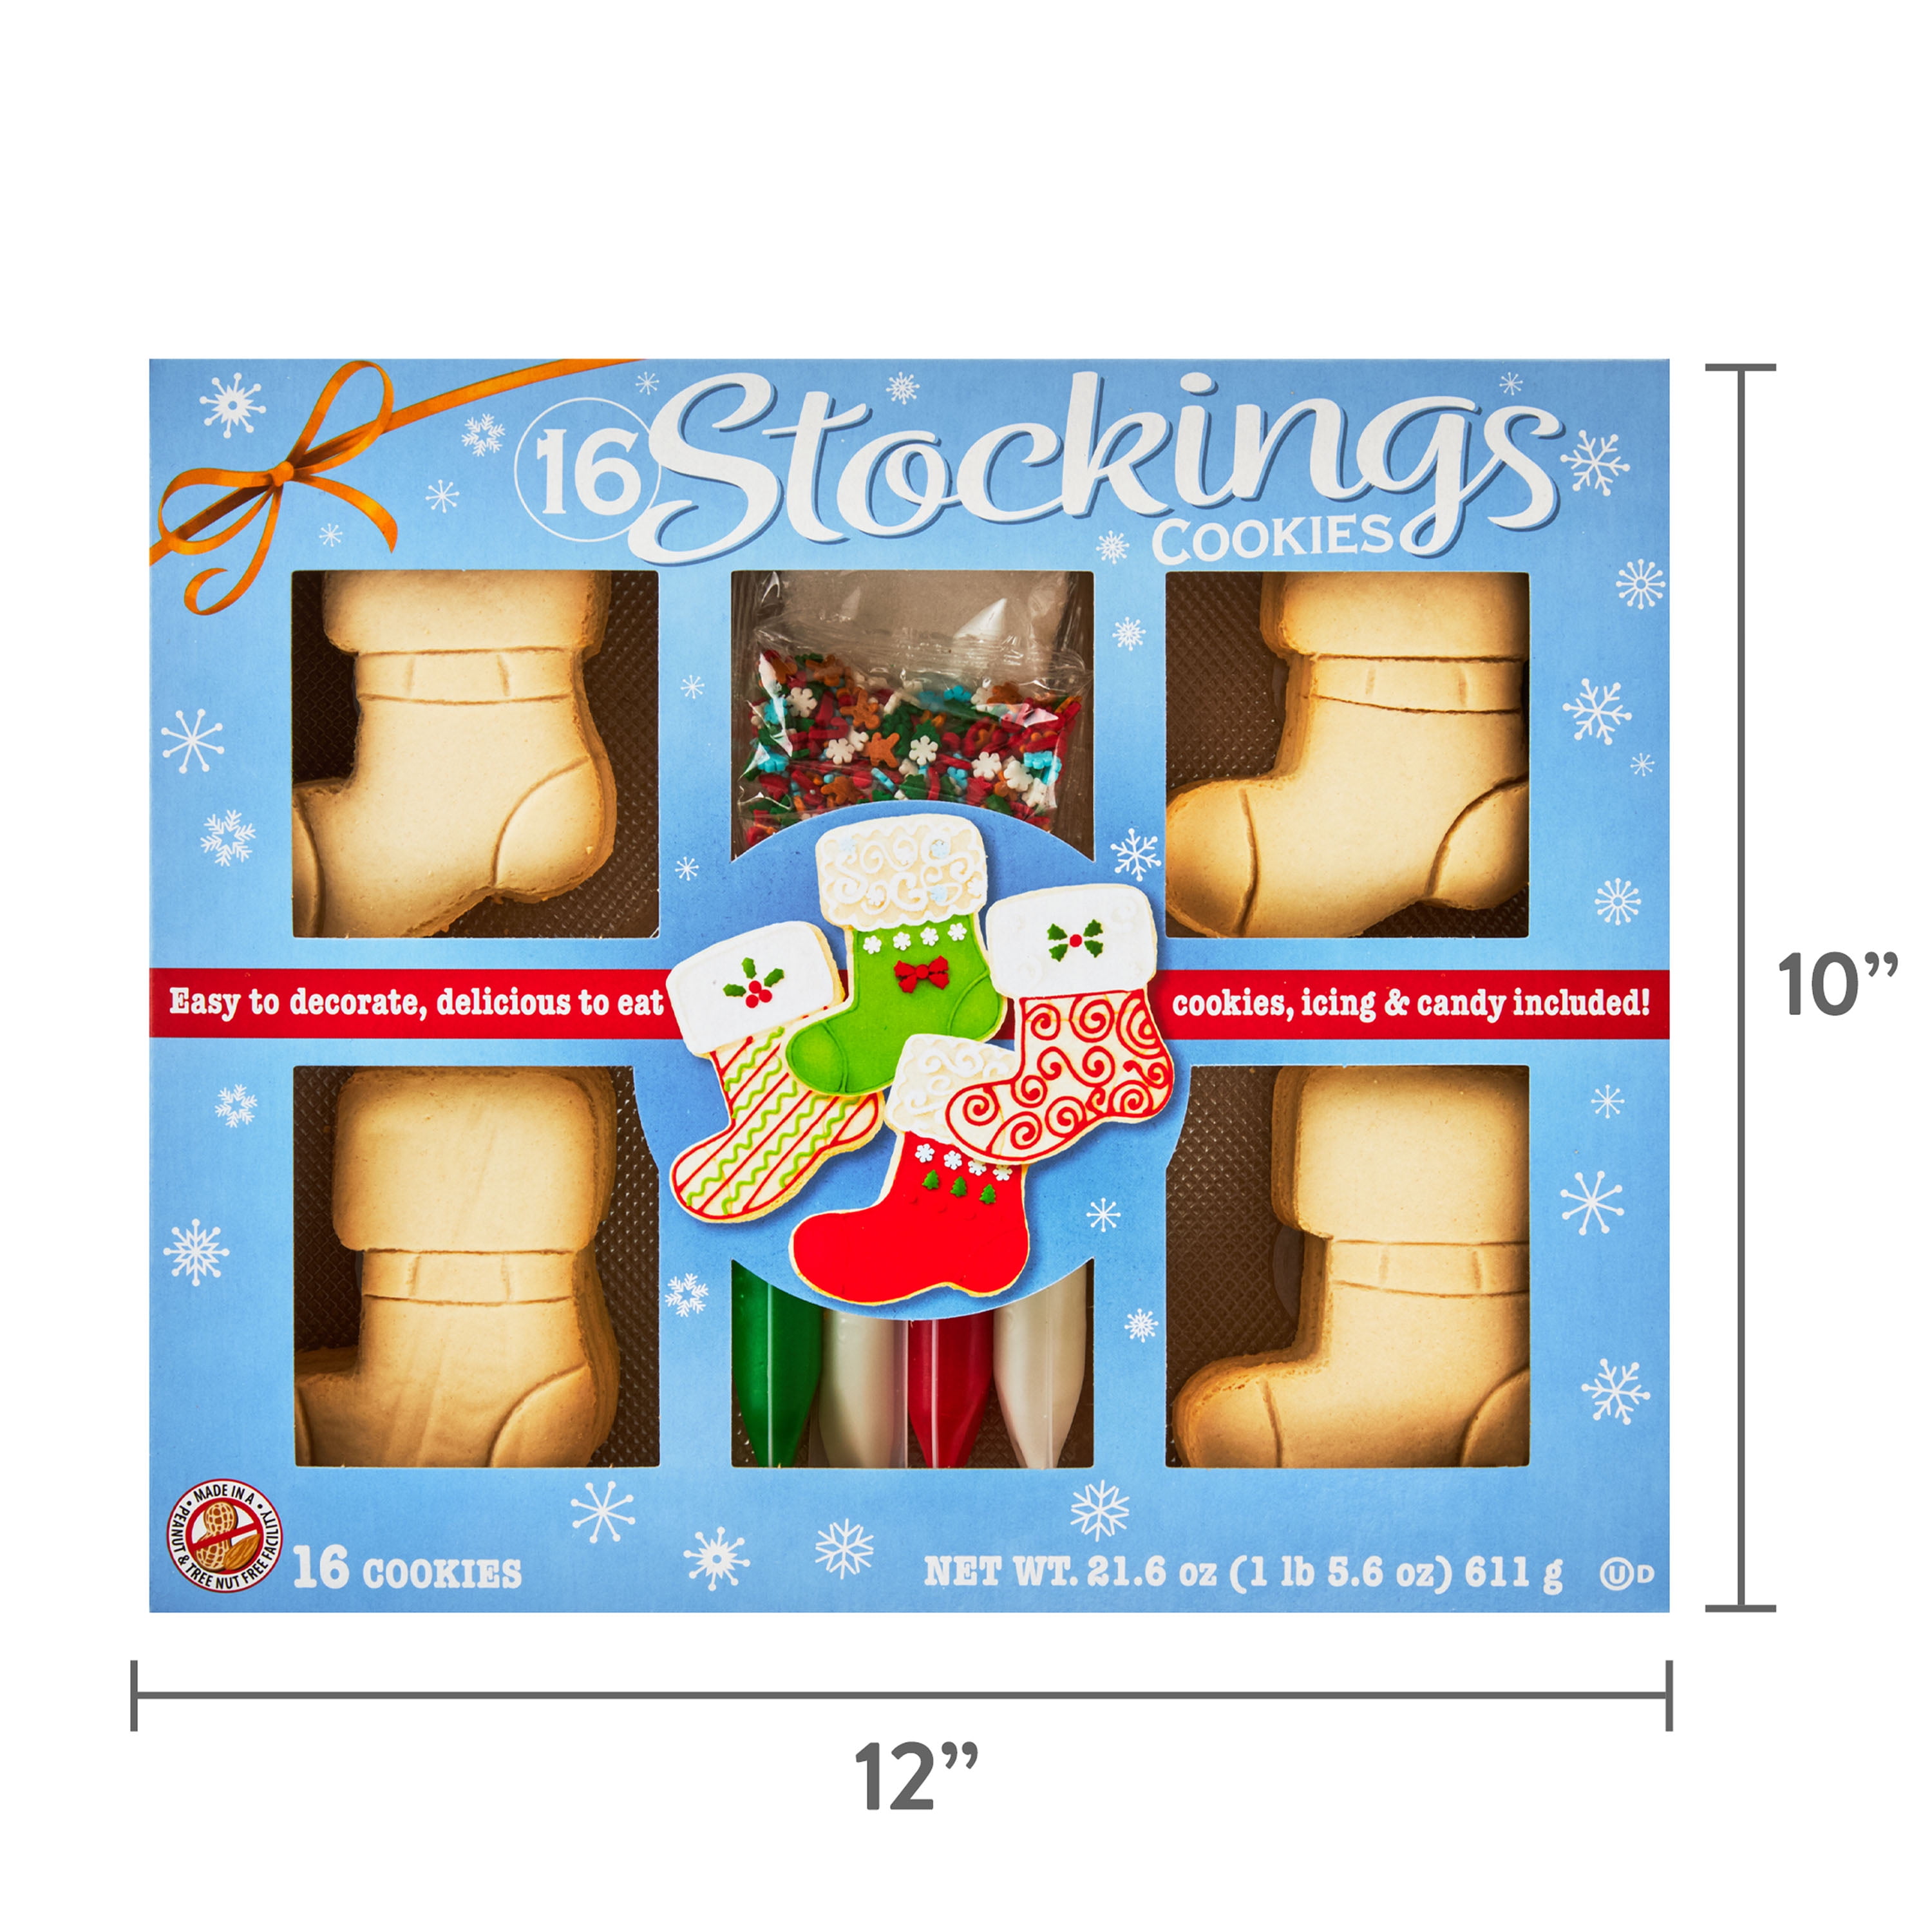 Cookie stocking stuffers 4 pack ( ready to be shipped) – 23sweets